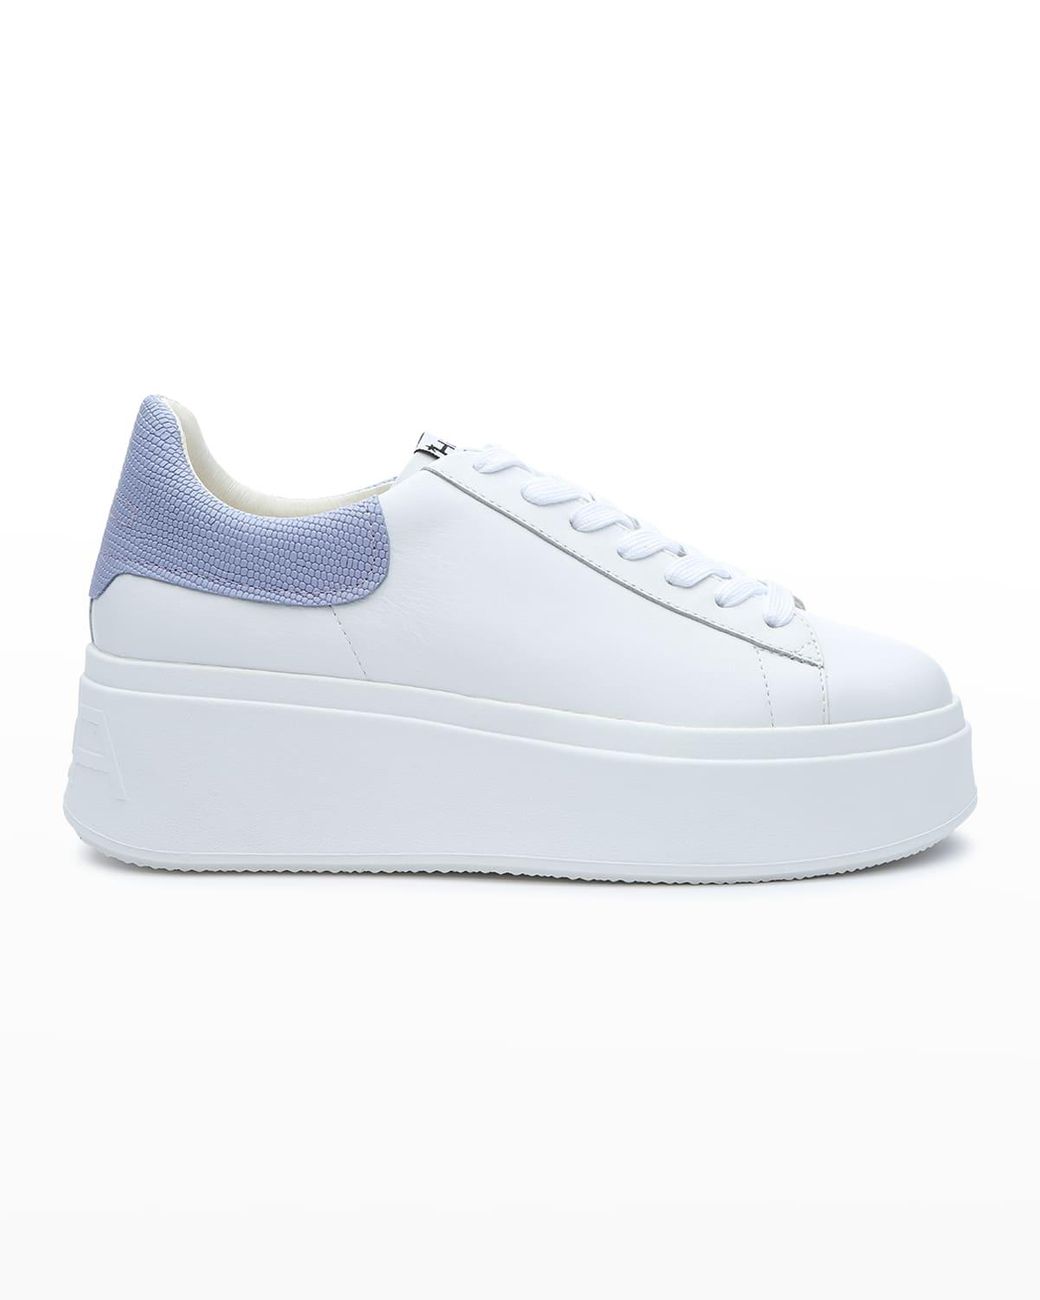 Ash Moby Bicolor Leather Platform Sneakers in Blue | Lyst